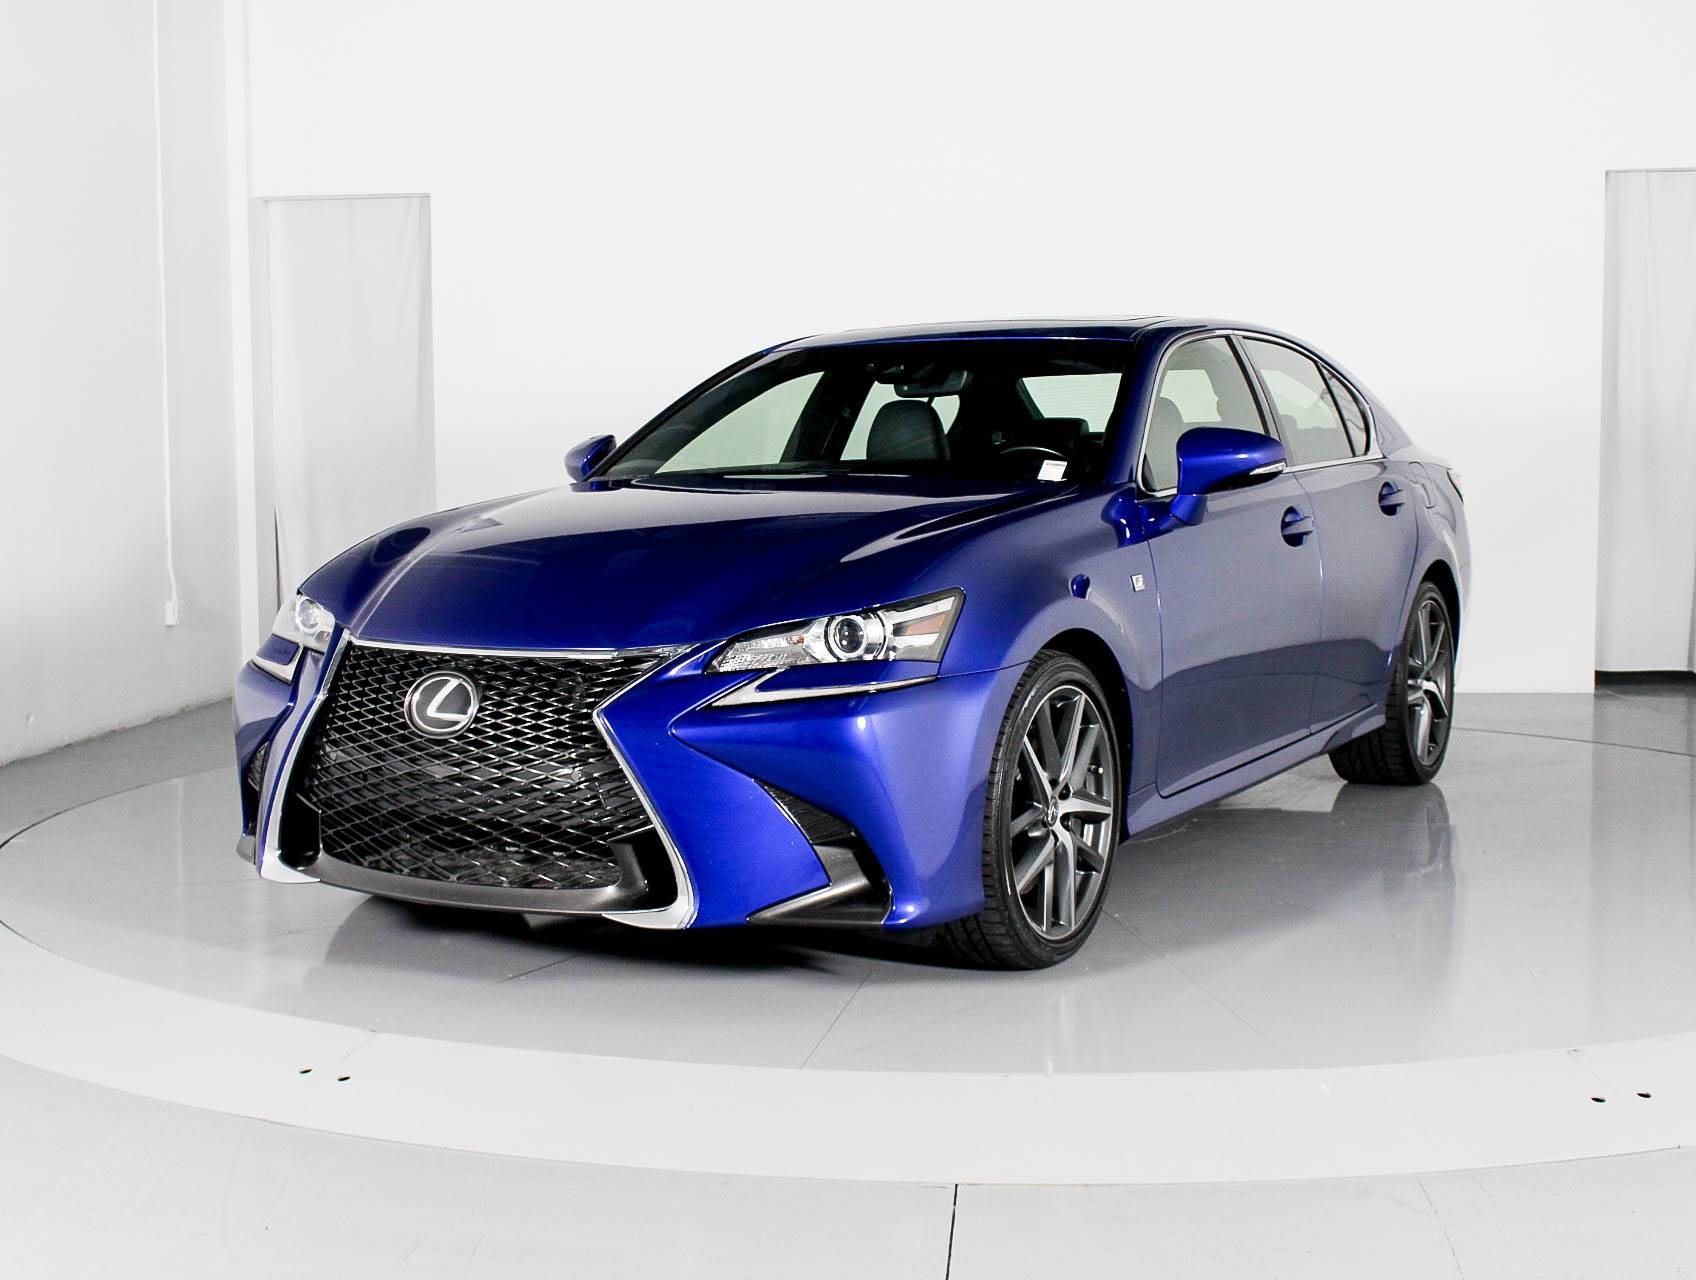 Used 2016 LEXUS GS 200T F Sport for sale in MARGATE | 101692